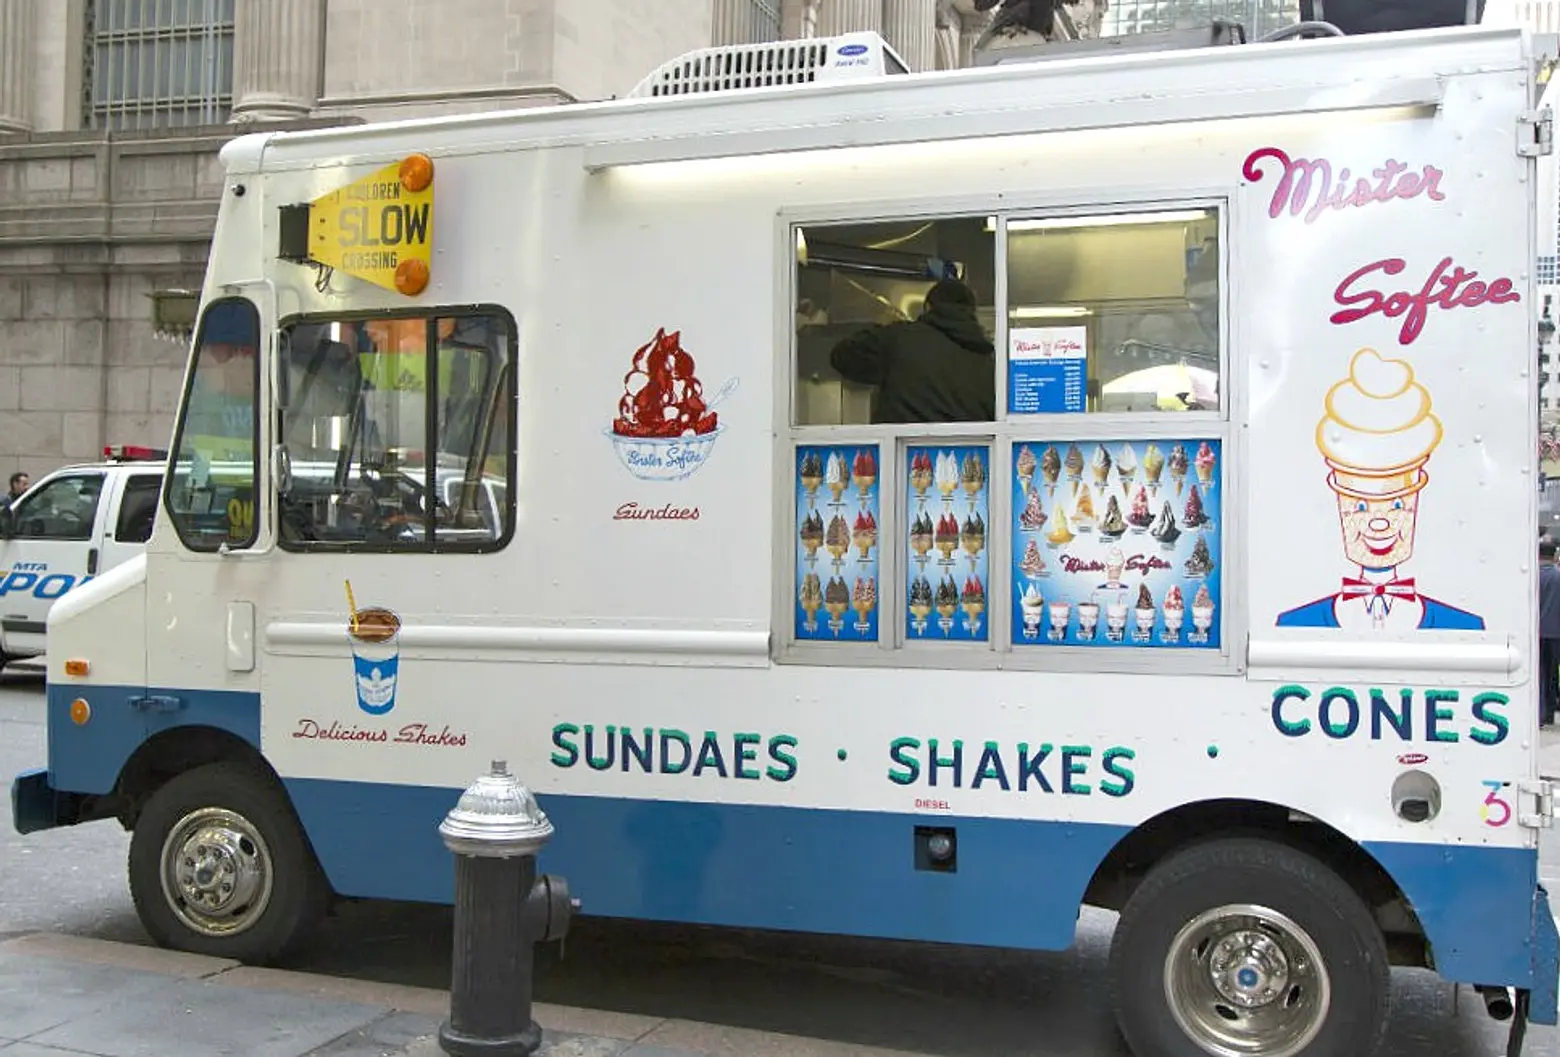 Ice Cream Truck Turf Wars; No One Wants to Stay at Trump Hotels